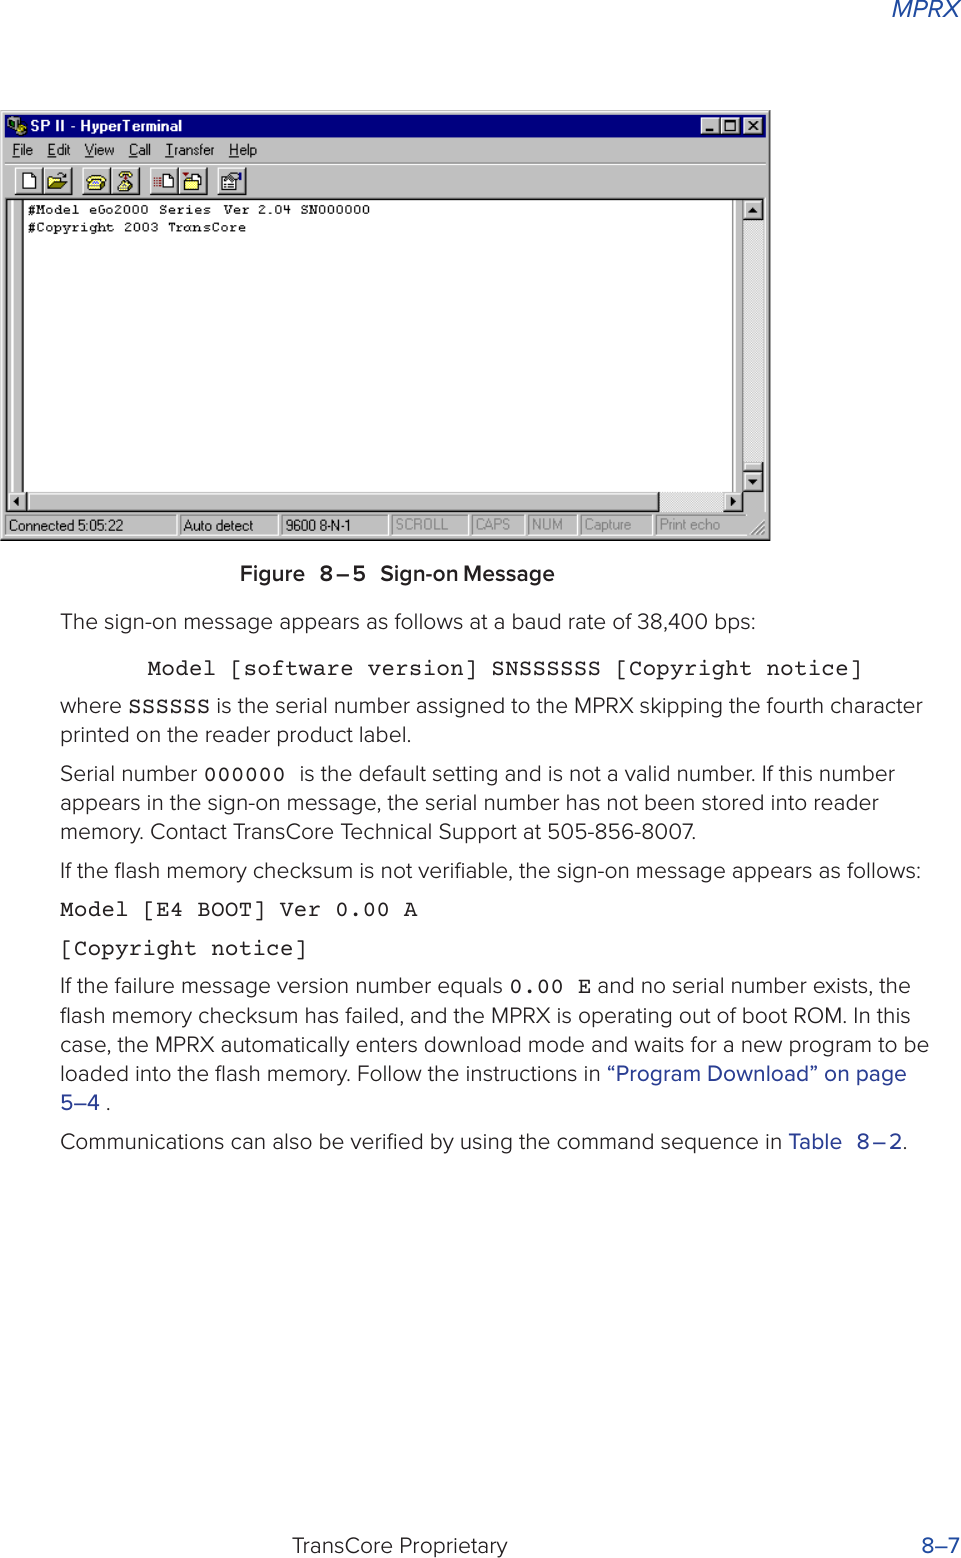 MPRXTransCore Proprietary 8–7Figure 8 – 5 Sign-on MessageThe sign-on message appears as follows at a baud rate of 38,400 bps:Model [software version] SNSSSSSS [Copyright notice]where SSSSSS is the serial number assigned to the MPRX skipping the fourth character printed on the reader product label.Serial number 000000 is the default setting and is not a valid number. If this number appears in the sign-on message, the serial number has not been stored into reader memory. Contact TransCore Technical Support at 505-856-8007.If the ﬂash memory checksum is not veriﬁable, the sign-on message appears as follows:Model [E4 BOOT] Ver 0.00 A[Copyright notice]If the failure message version number equals 0.00 E and no serial number exists, the ﬂash memory checksum has failed, and the MPRX is operating out of boot ROM. In this case, the MPRX automatically enters download mode and waits for a new program to be loaded into the ﬂash memory. Follow the instructions in “Program Download” on page 5–4 .Communications can also be veriﬁed by using the command sequence in Table 8 – 2.